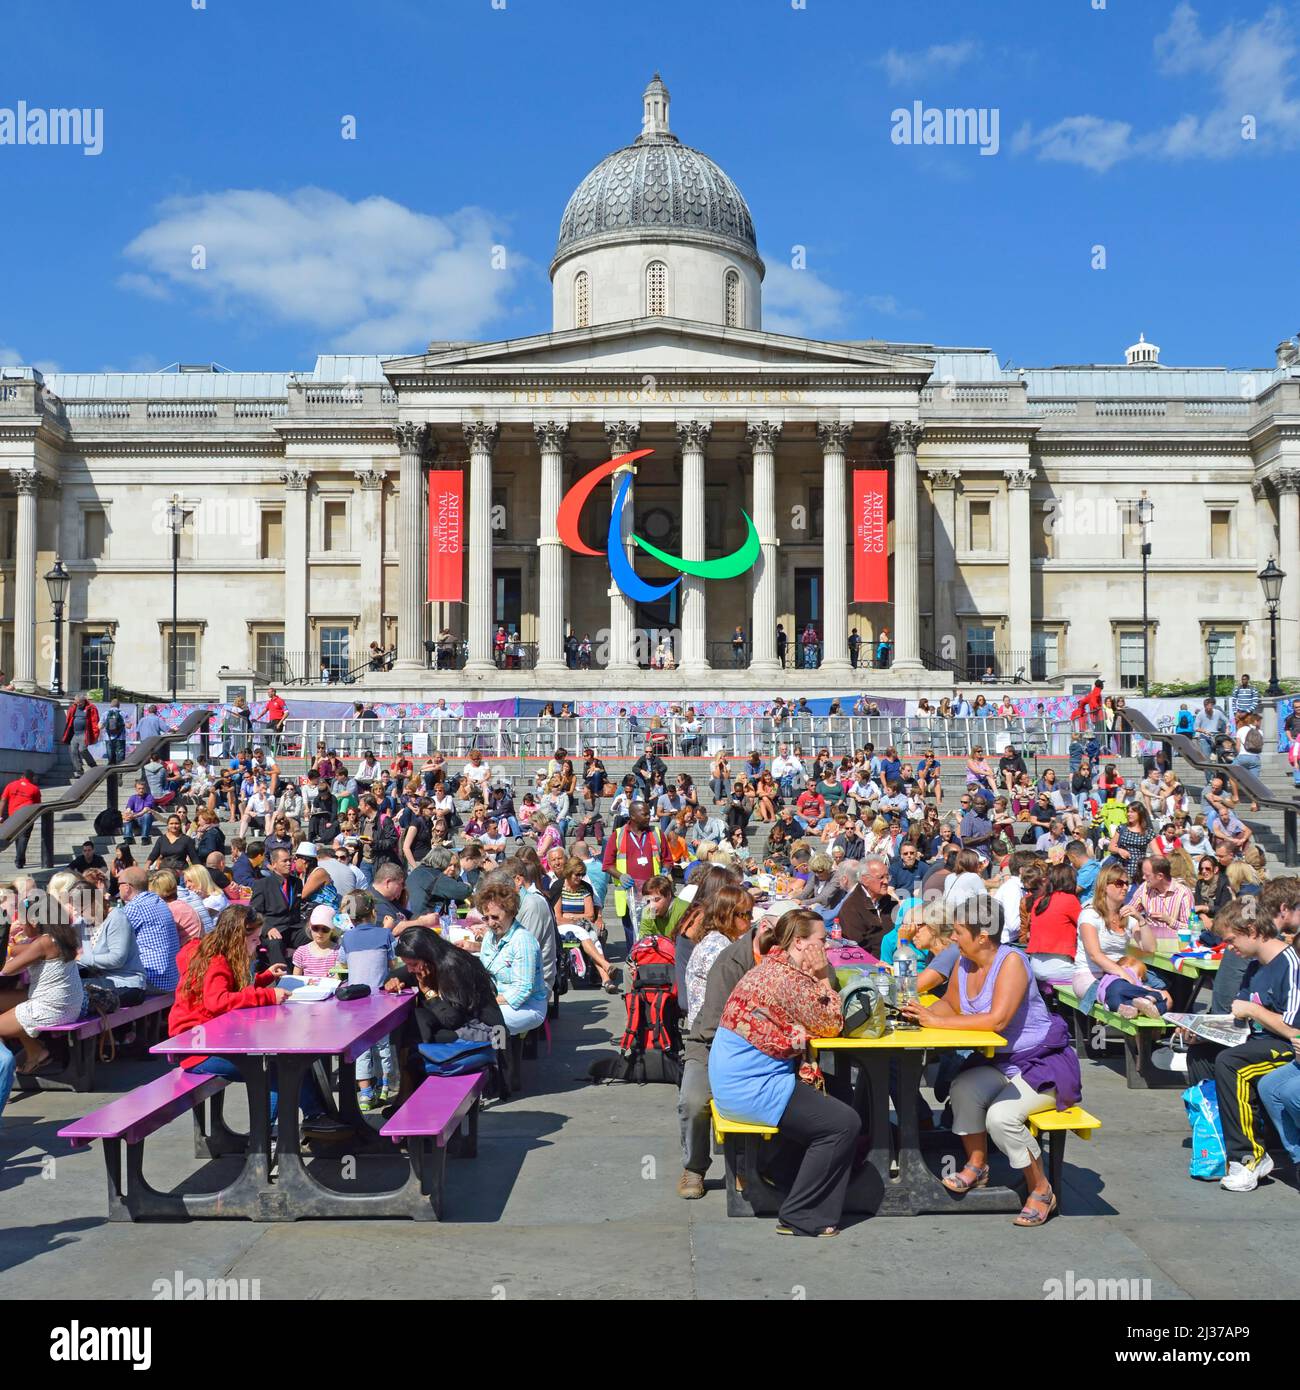 Tourists & visitors sit at coloured picnic tables in Trafalgar Square 2012 London Paralympic Games logo on colonnade of National Gallery England UK Stock Photo